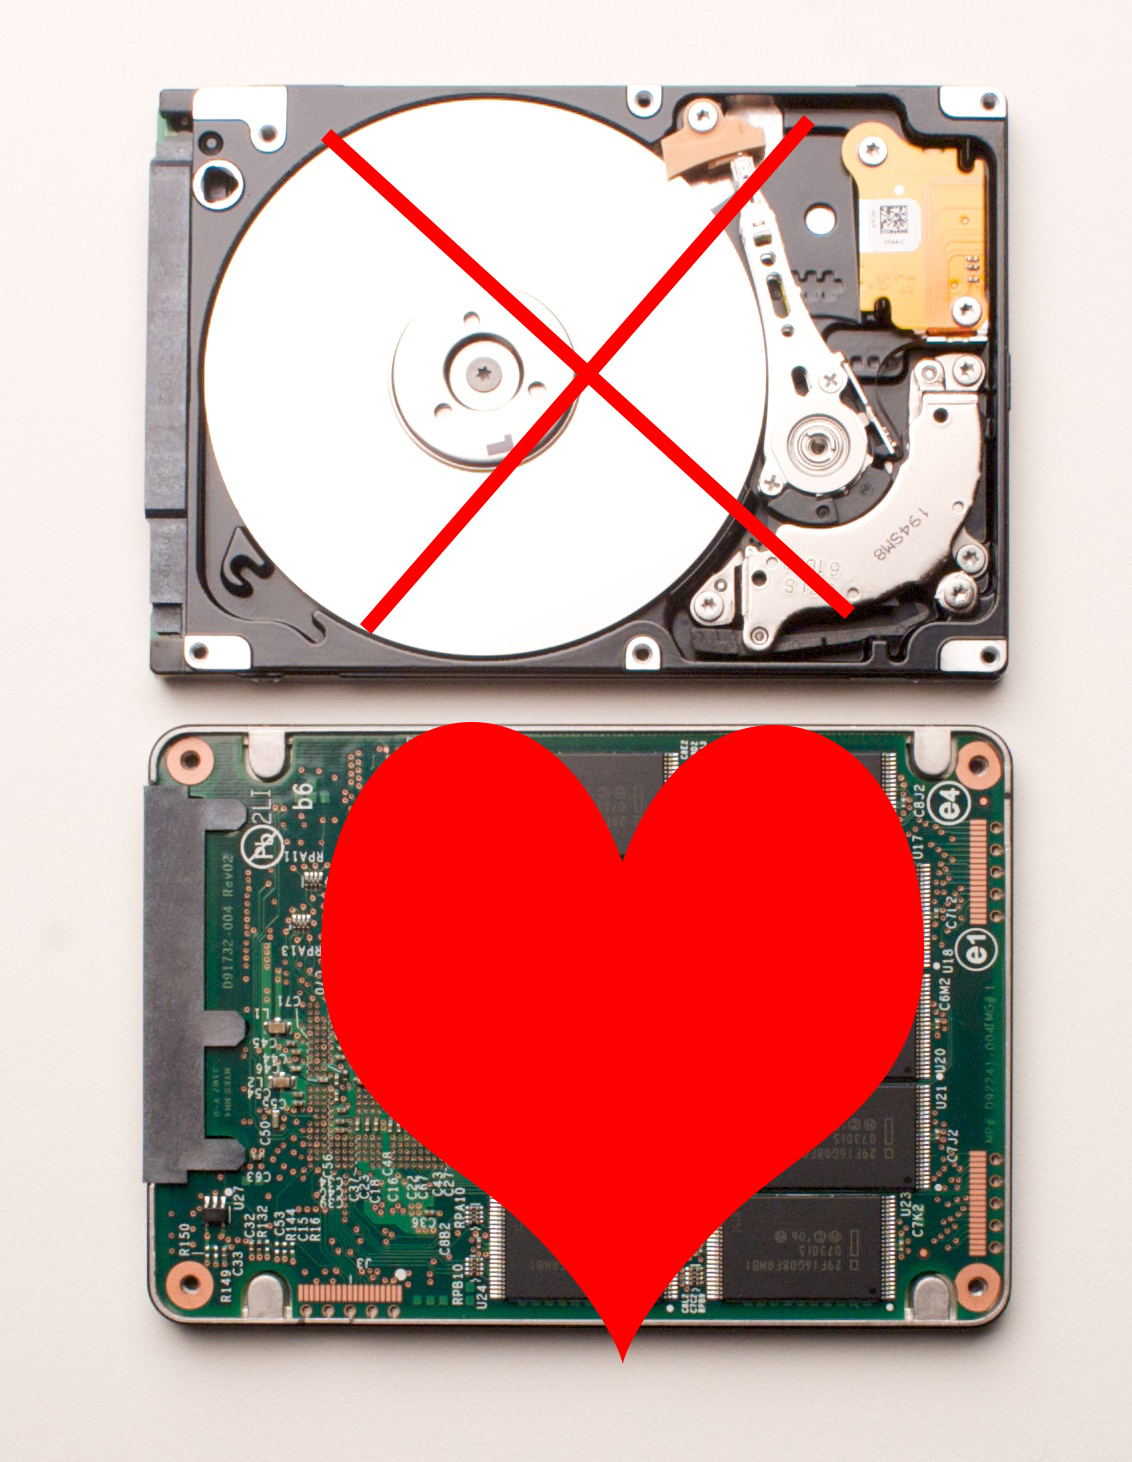 A conventional hard drive witn an x on it and a solid state drive with a heart.